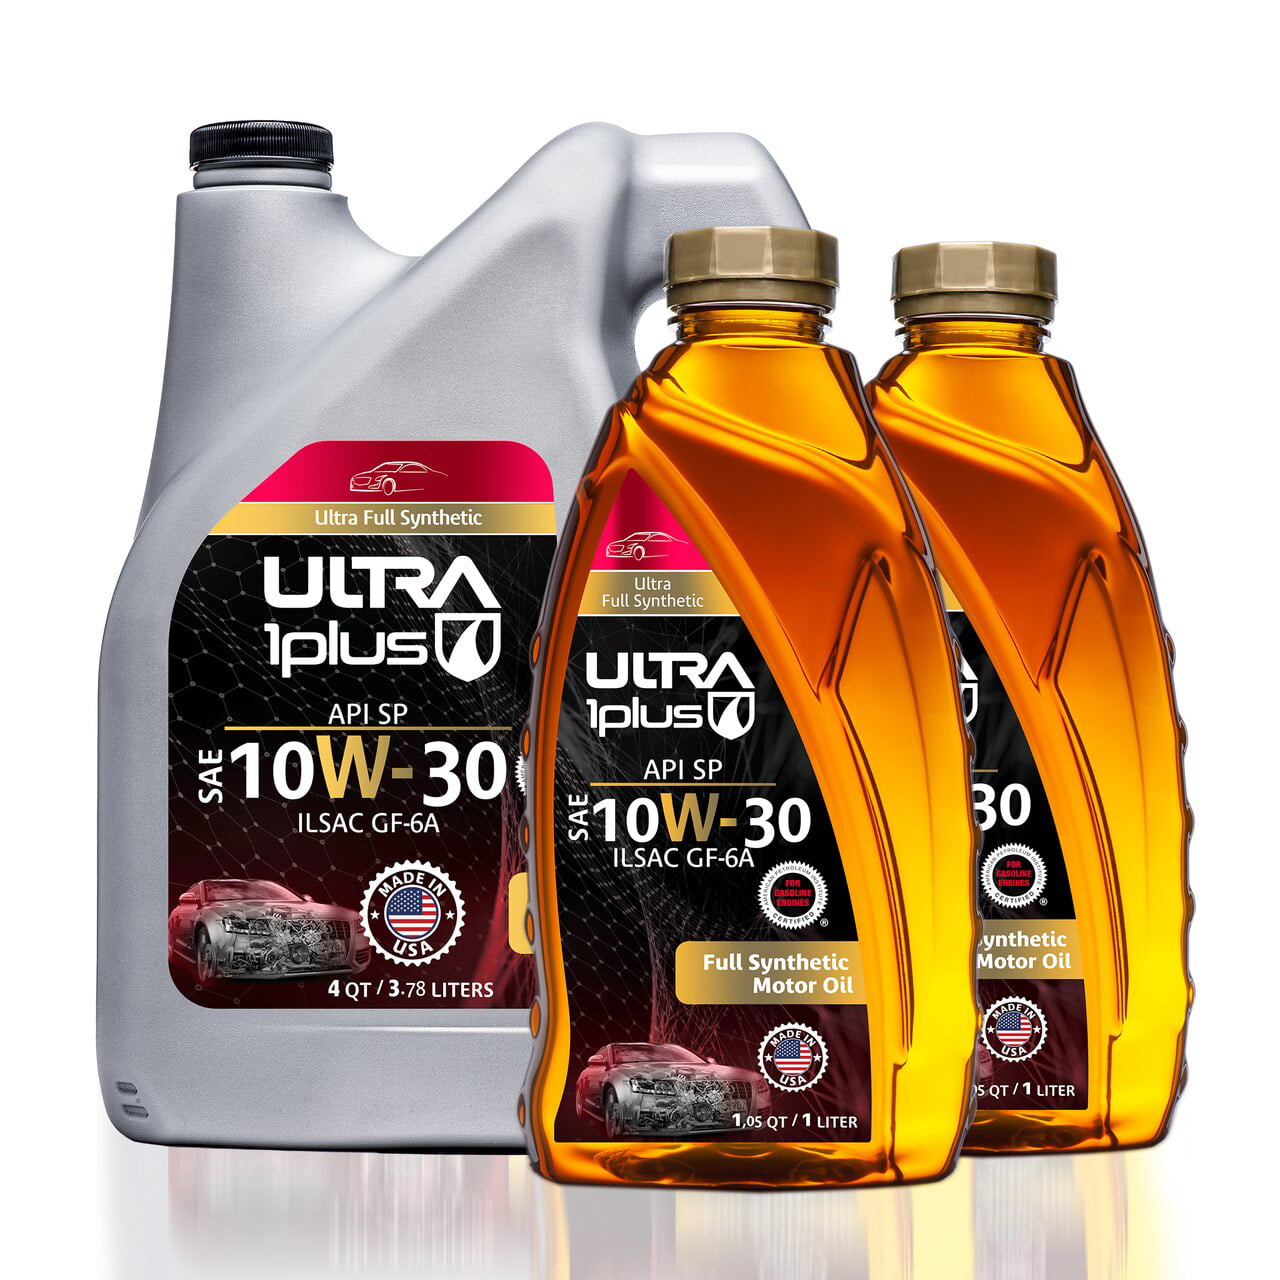 Ultra1Plus™ 10W-30 Full Synthetic Motor Oil, API SP, ILSAC GF-6A | Pack .